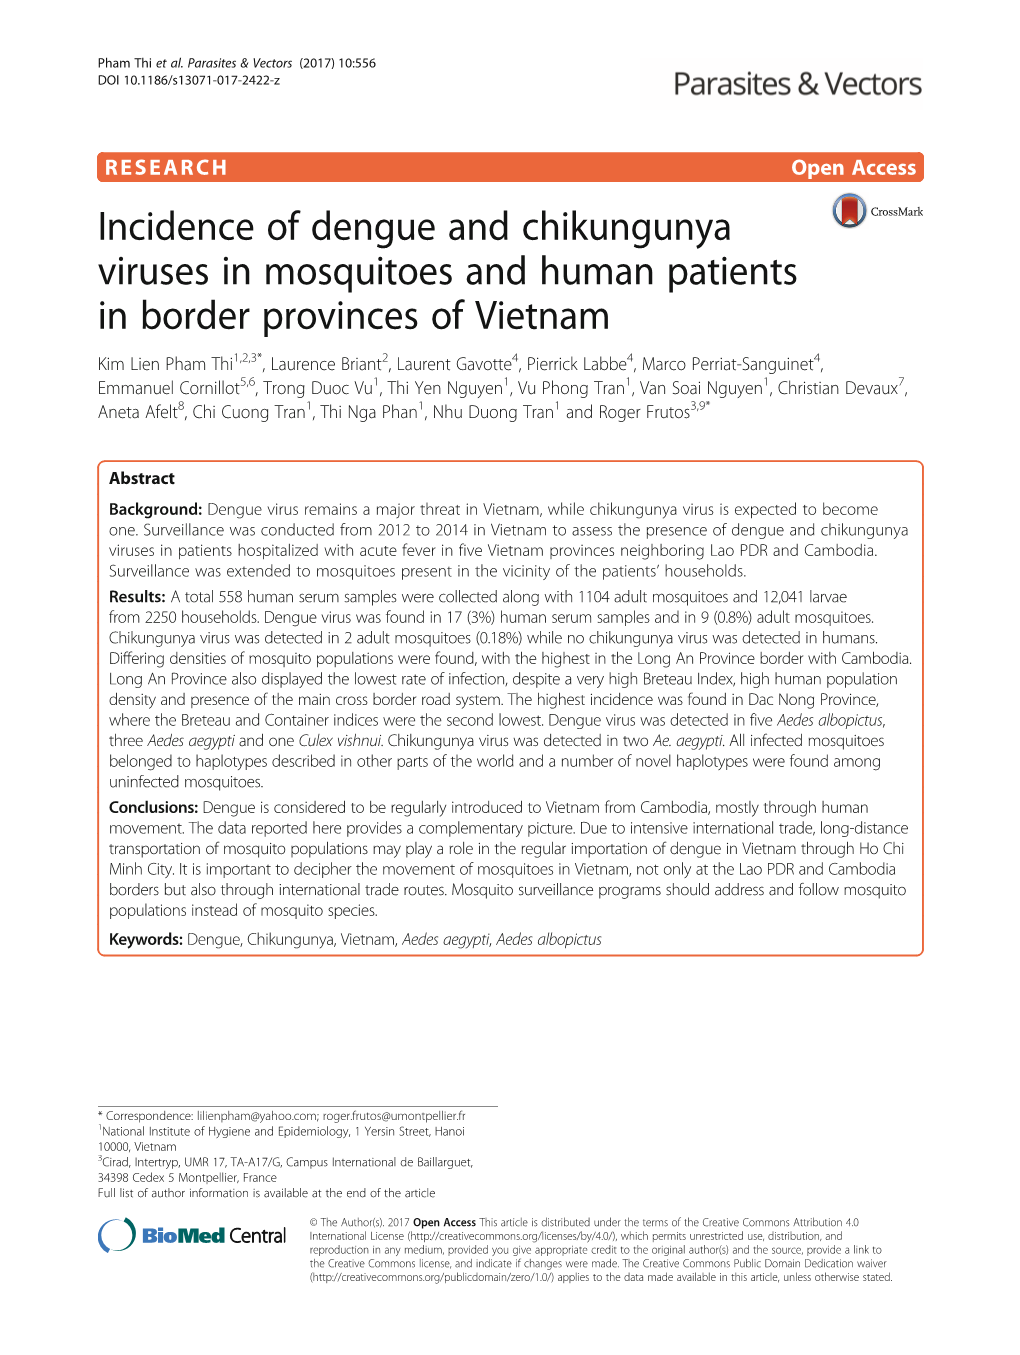 Incidence of Dengue and Chikungunya Viruses in Mosquitoes and Human